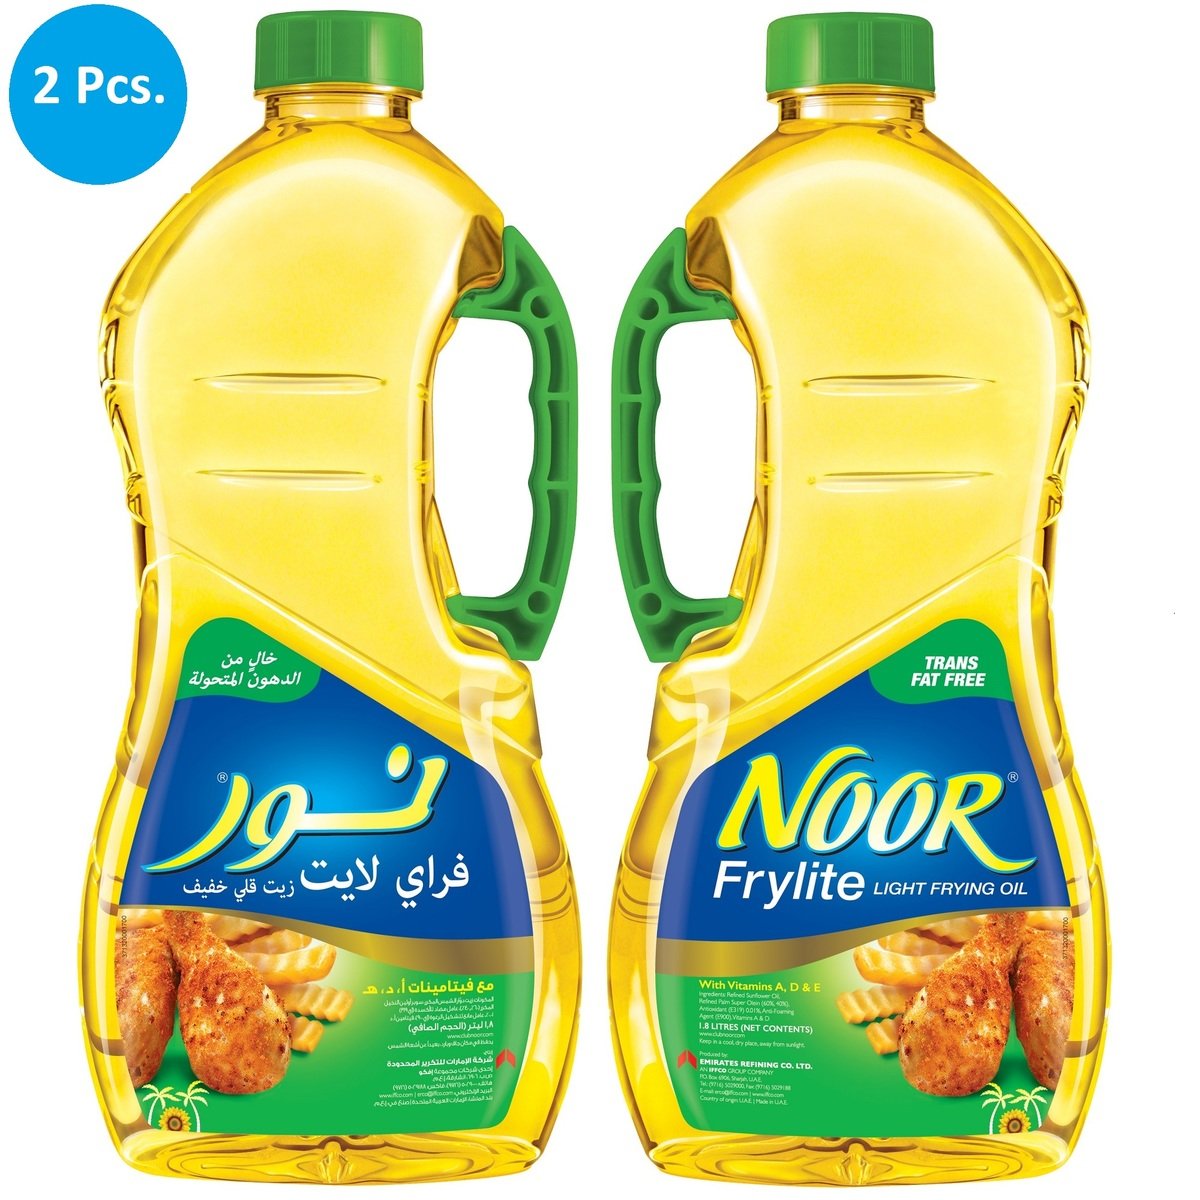 Noor Frylite Cooking And Frying Oil 2 x 1.8 Litres